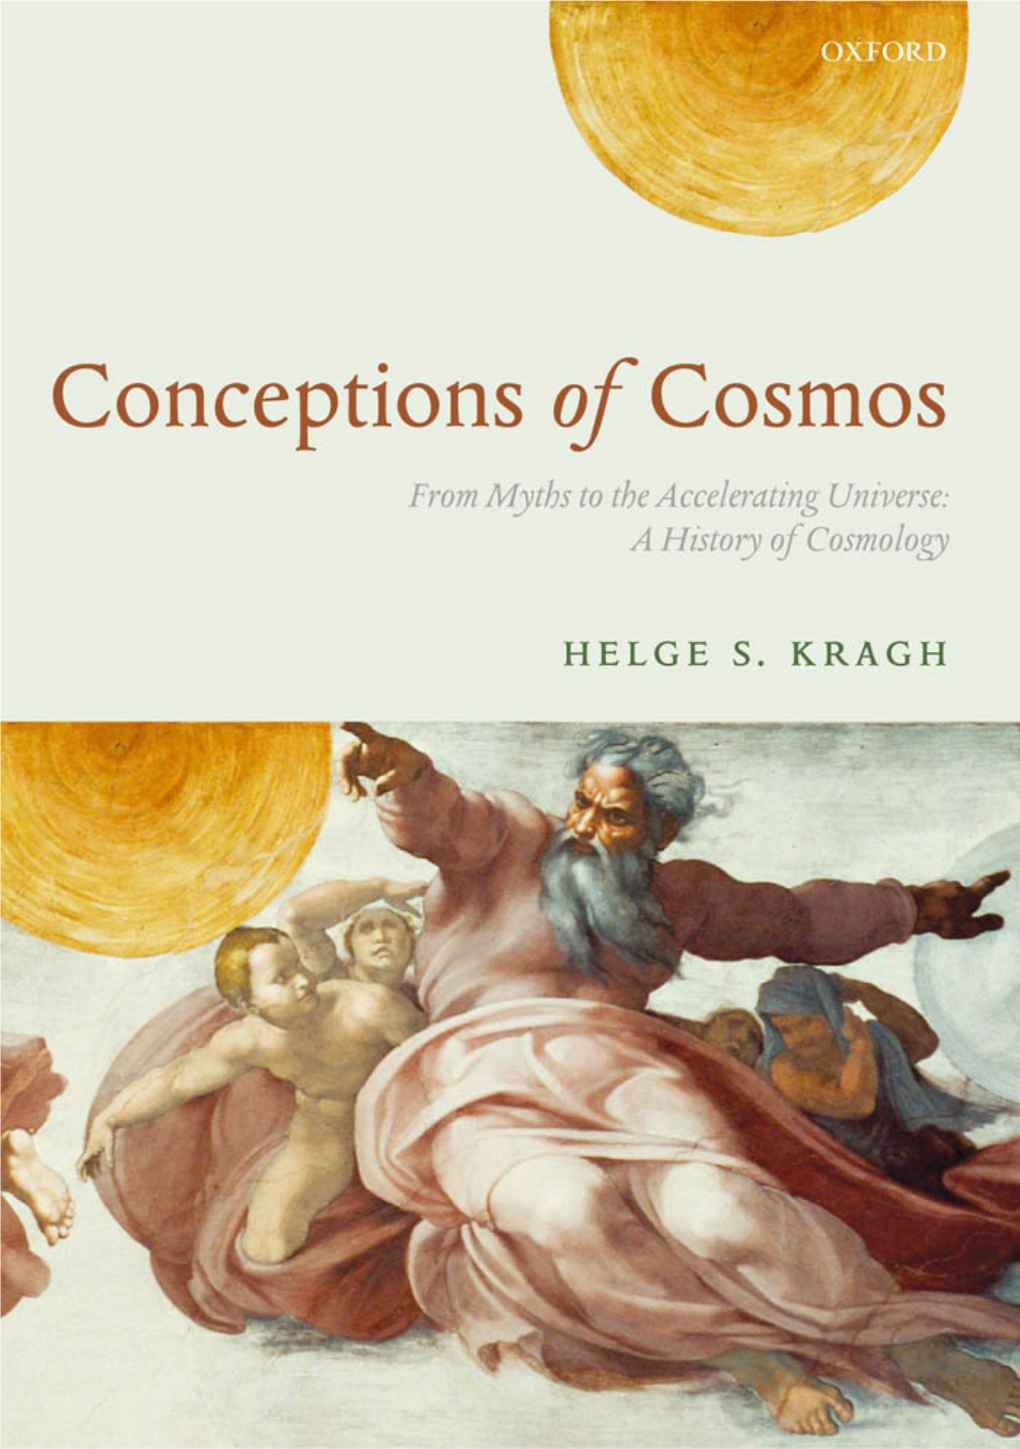 Conceptions of Cosmos : from Myths to the Accelerating Universe : a History of Cosmology / Helge S